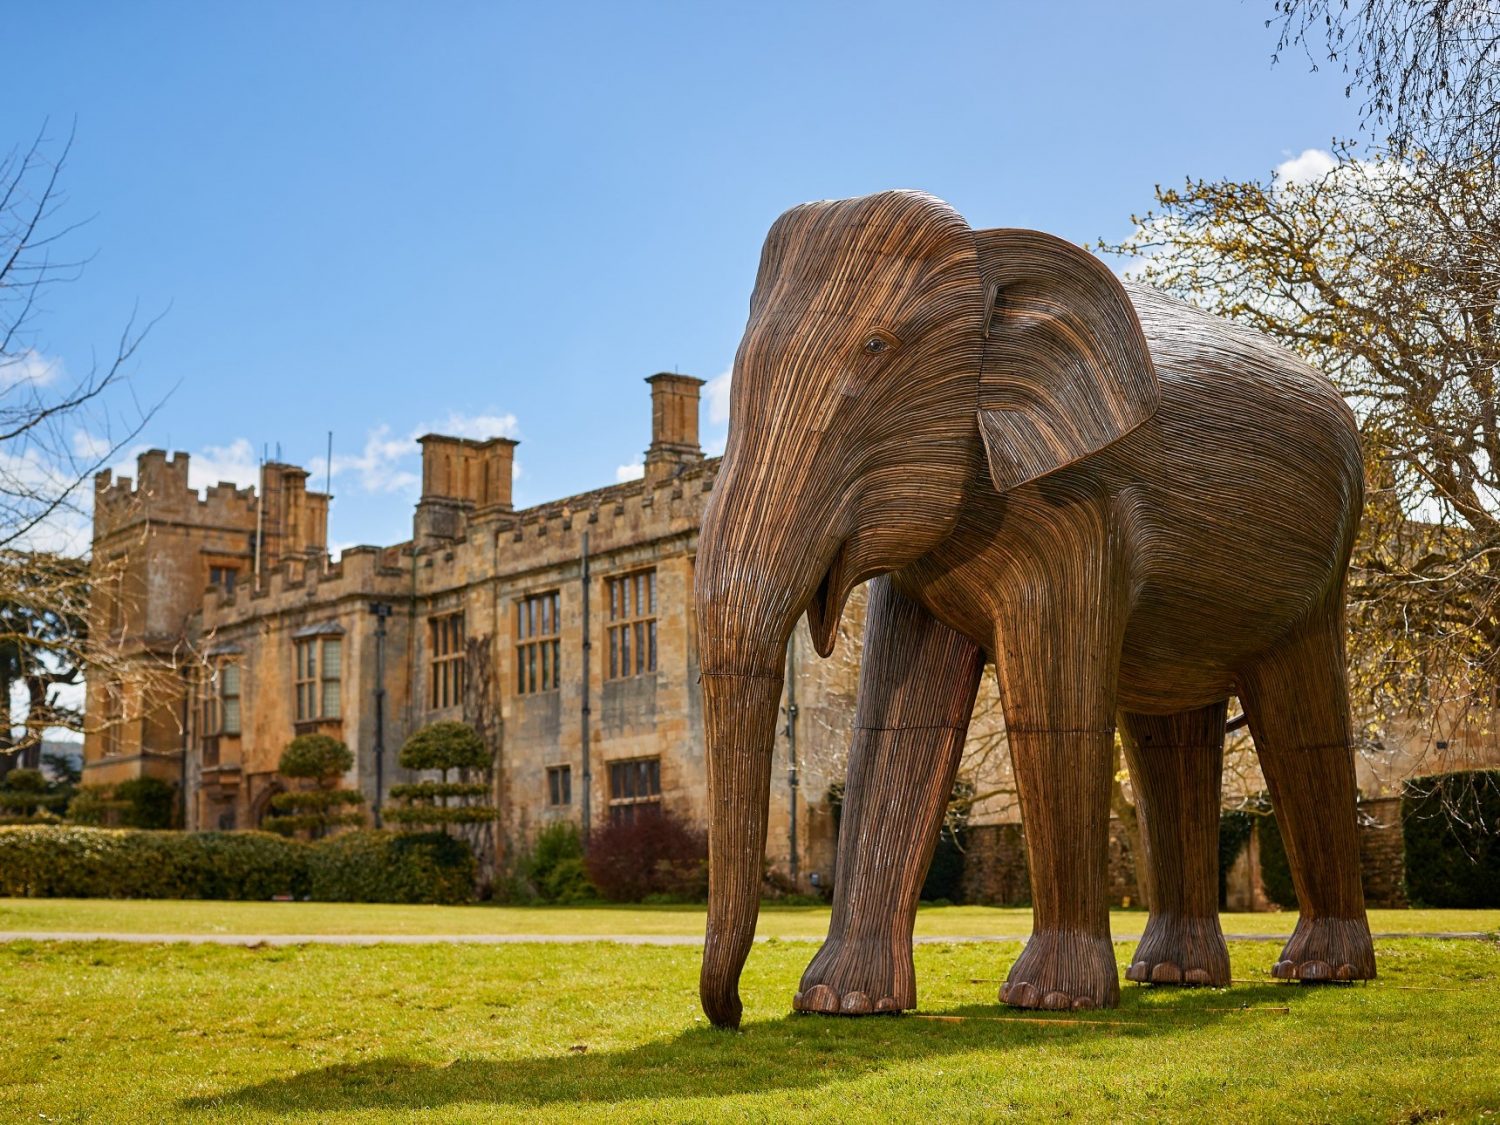 Elephant sculpture in front of castle